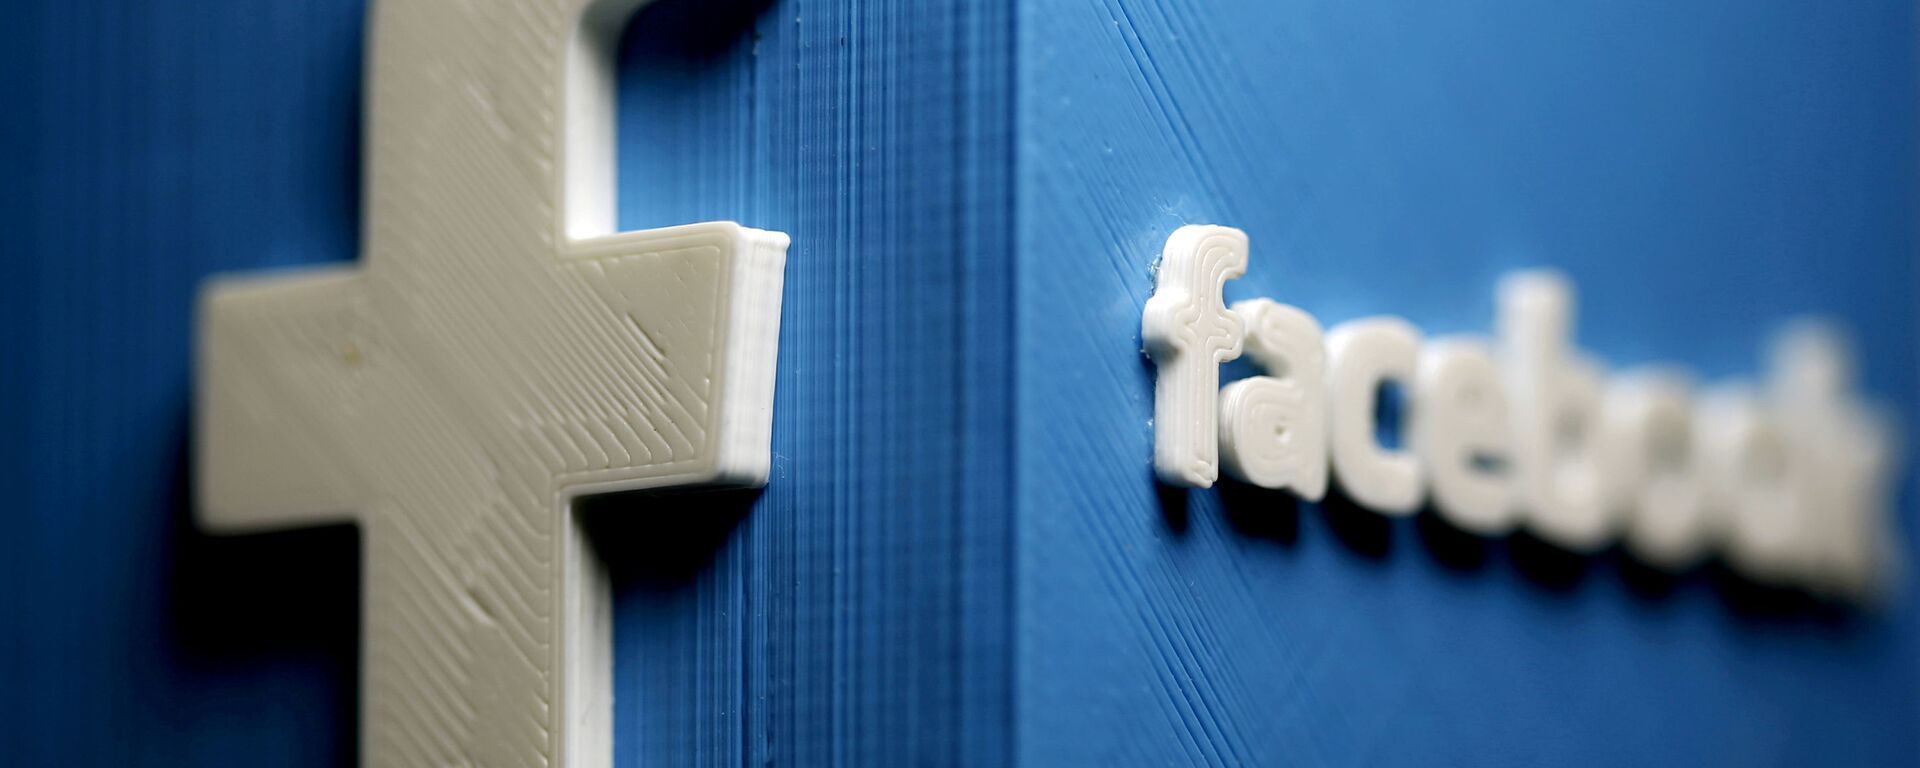 A 3D plastic representation of the Facebook logo is seen in this illustration in Zenica, Bosnia and Herzegovina, May 13, 2015. REUTERS/Dado Ruvic//File Photo/File Photo - Sputnik International, 1920, 02.07.2021